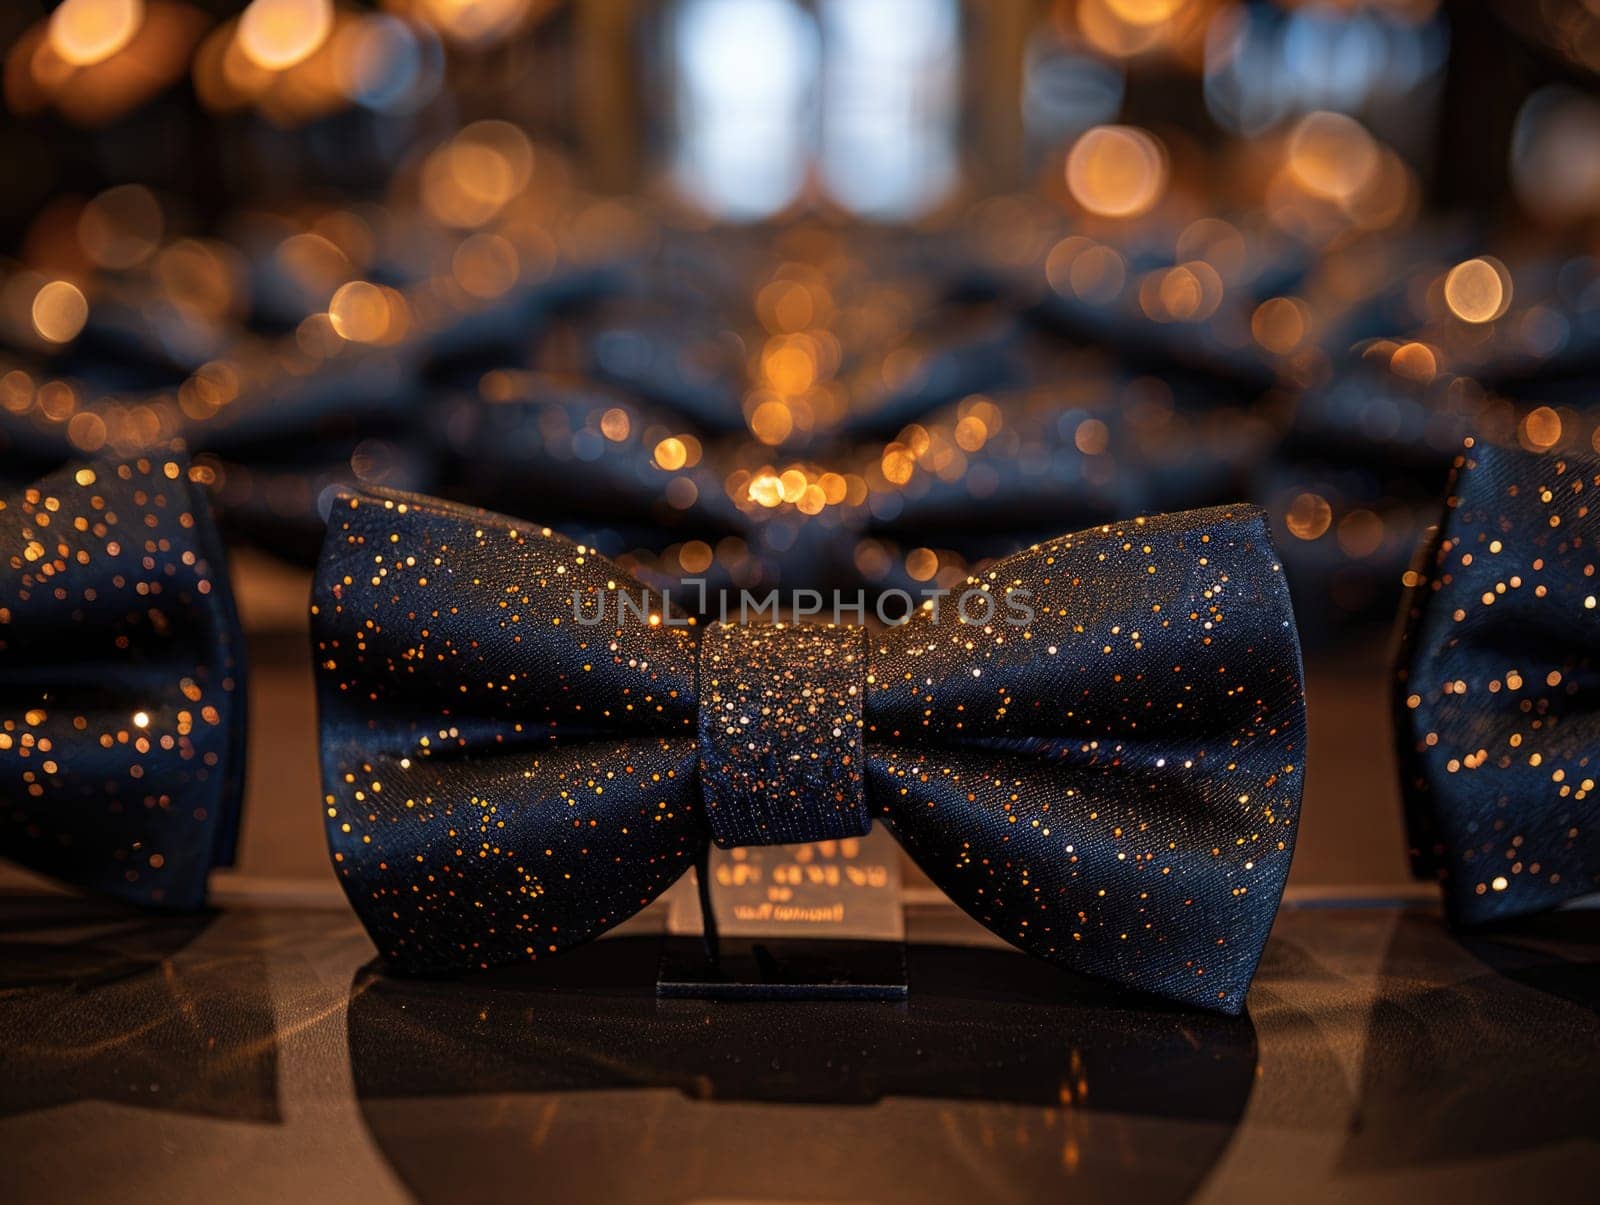 A close-up shot of a stylish bow tie placed neatly on a table, highlighting its intricate design.